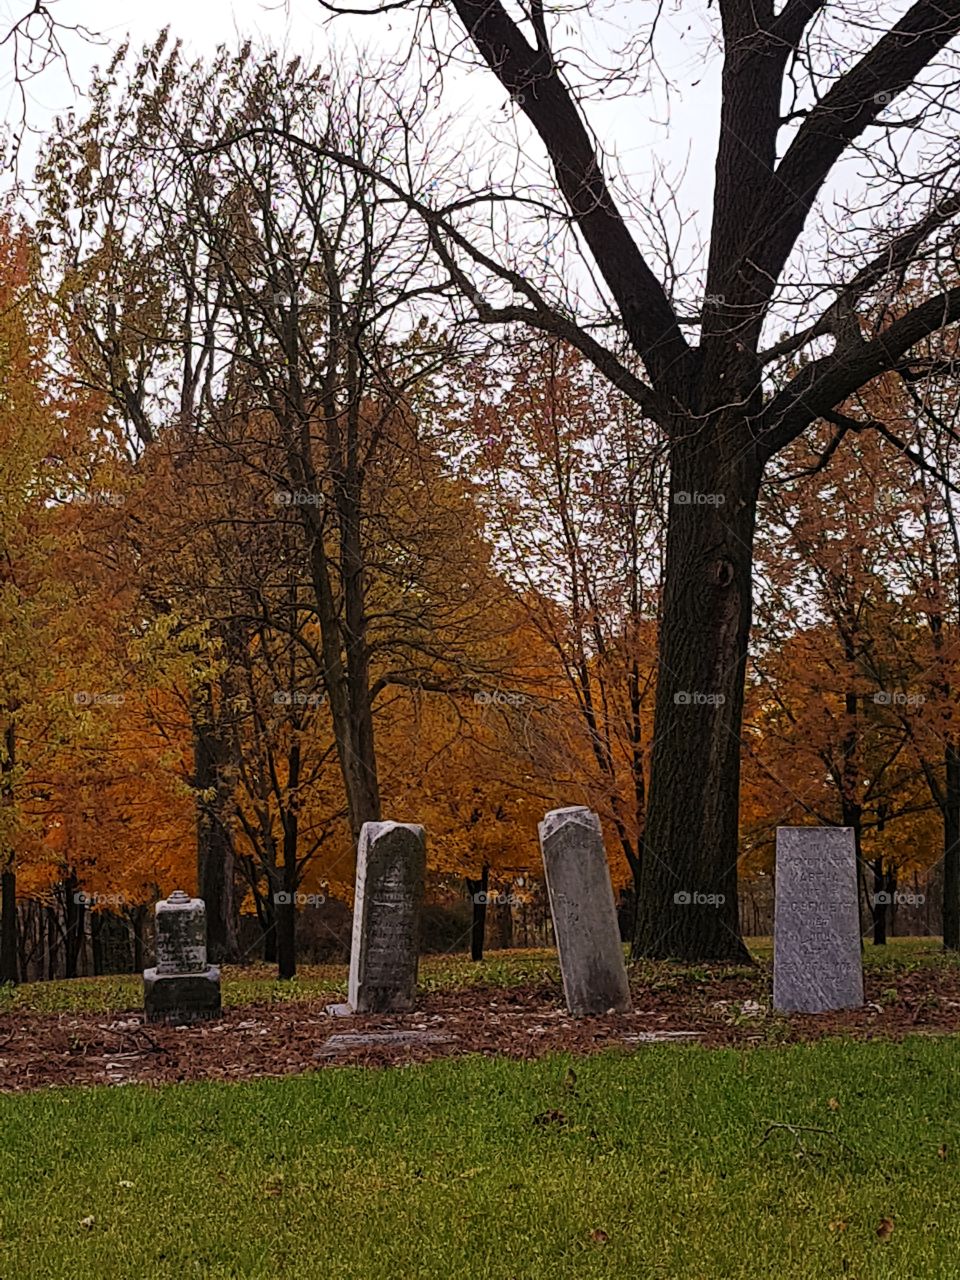 4 headstones stand in front of a scenic autumn backdrop. Petrolia's earliest stones.